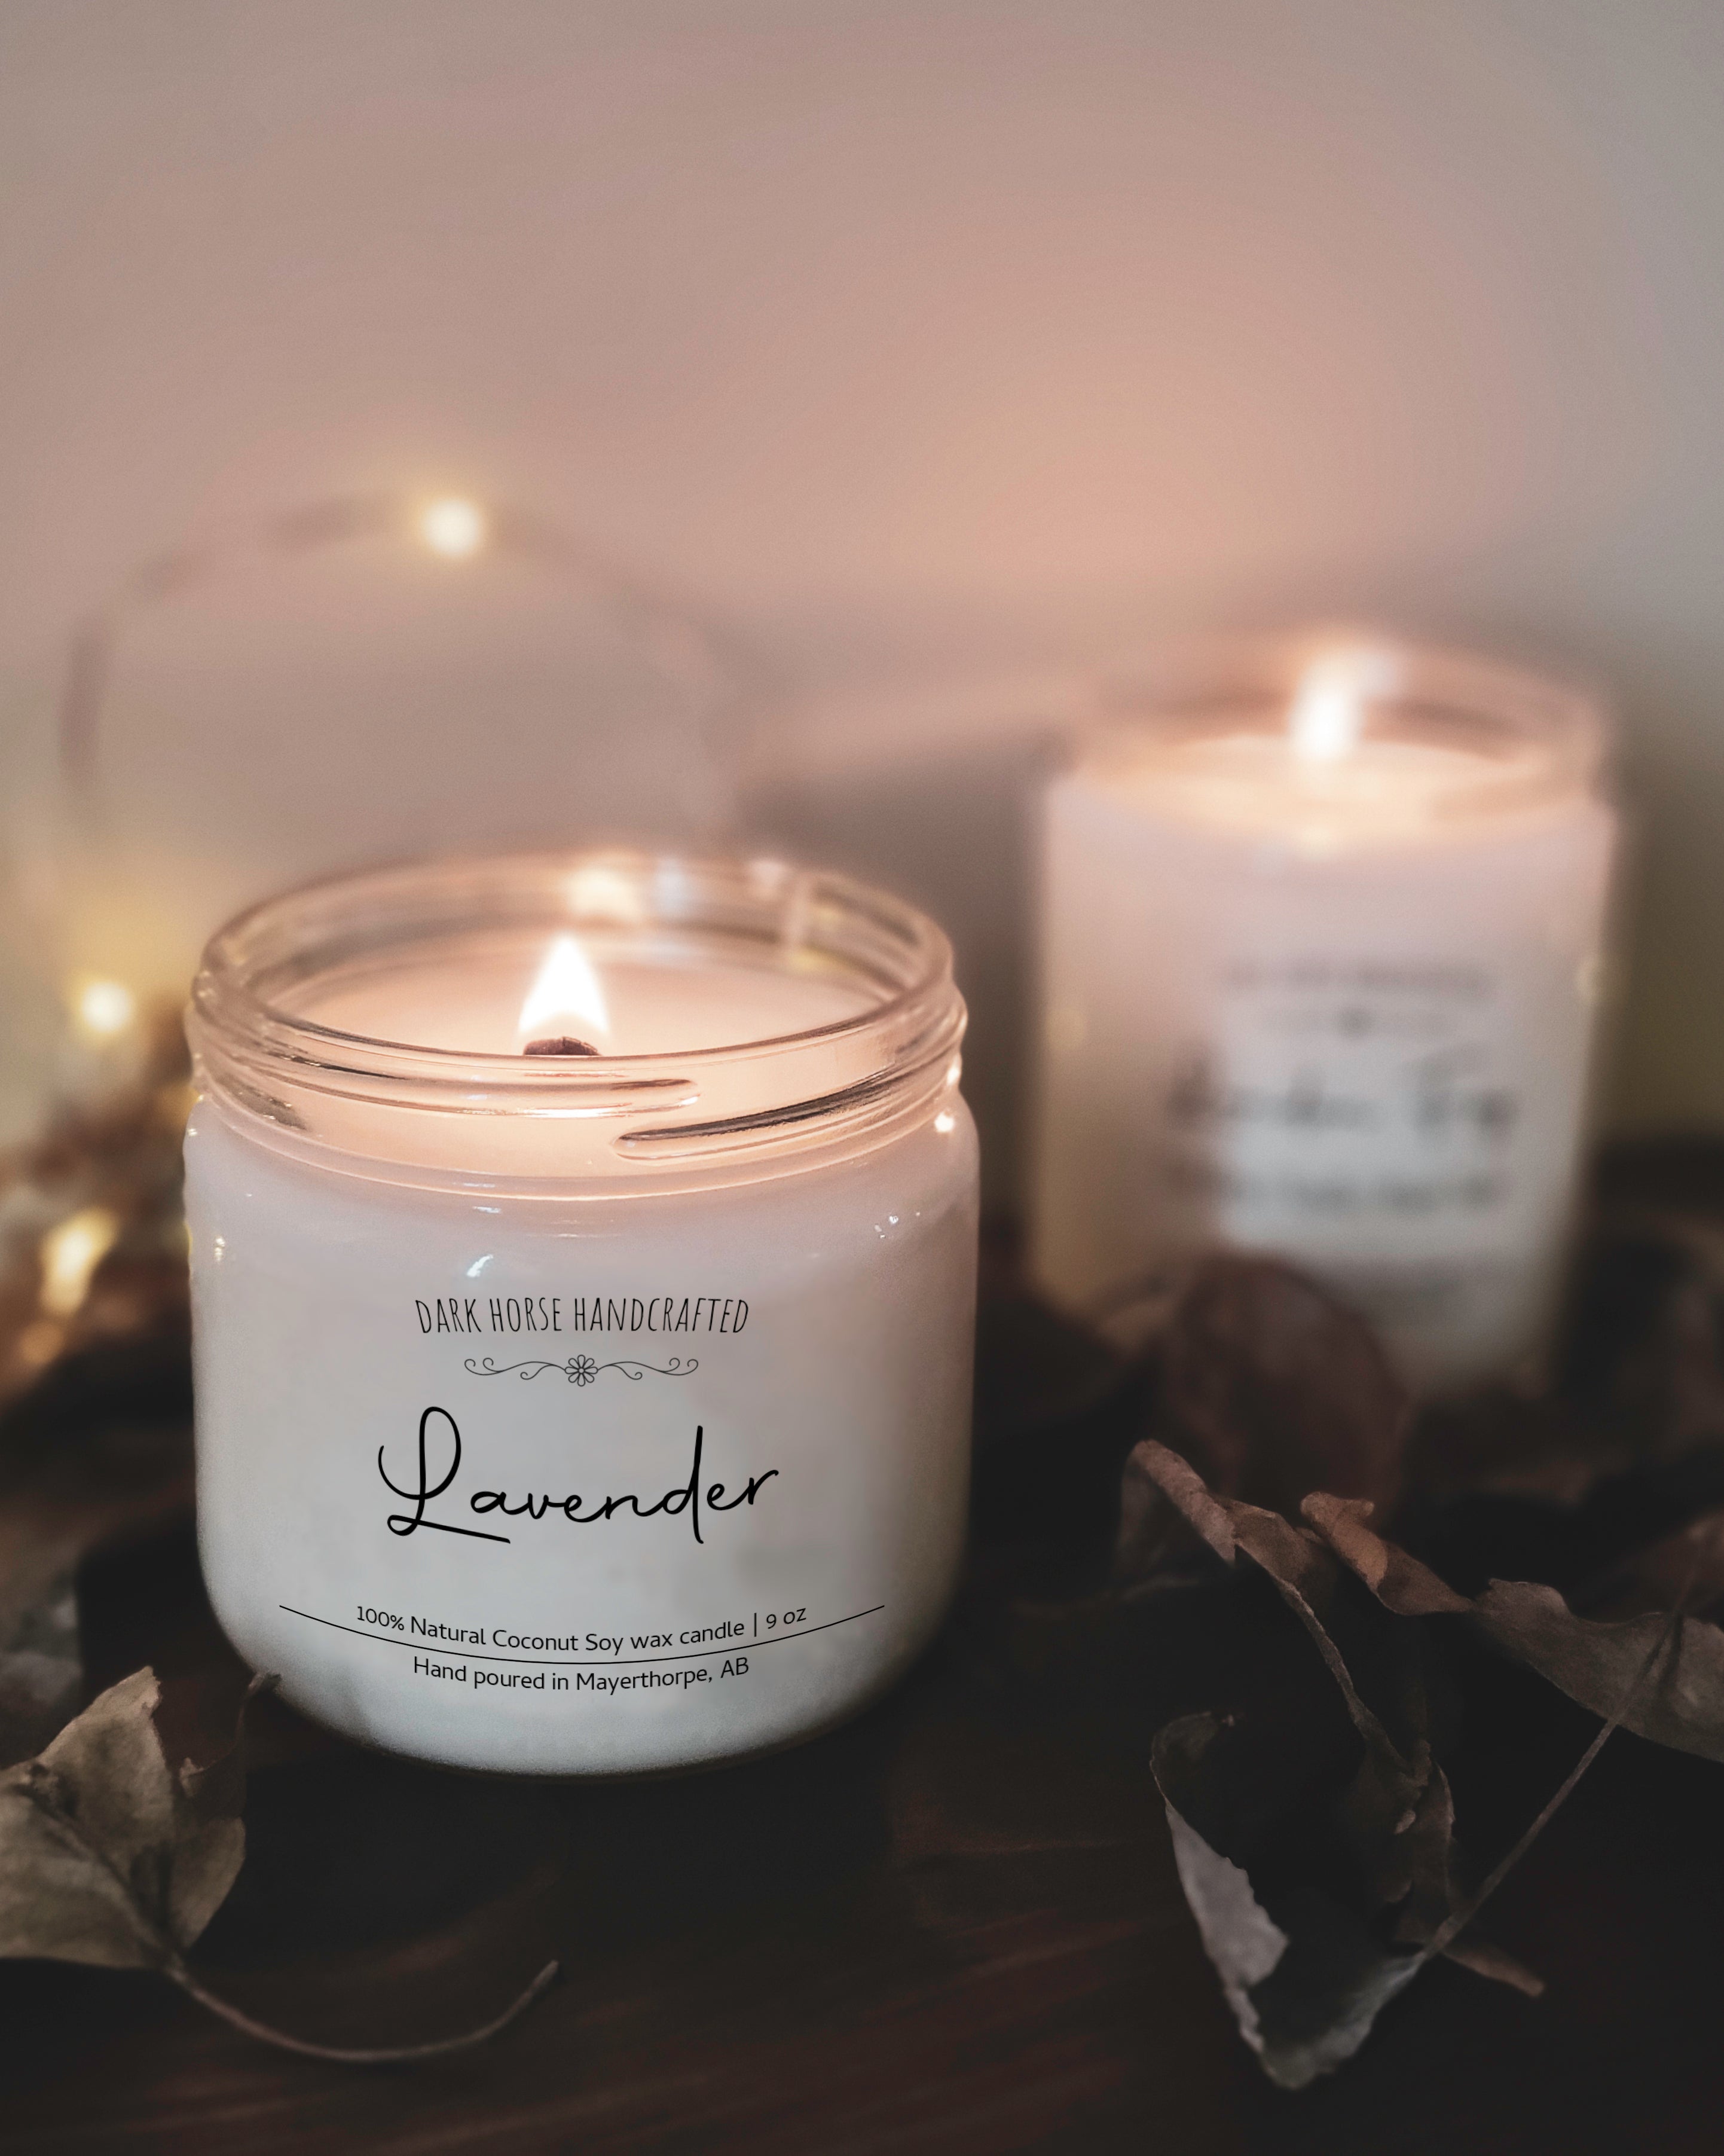 Lavender - Soy Candle